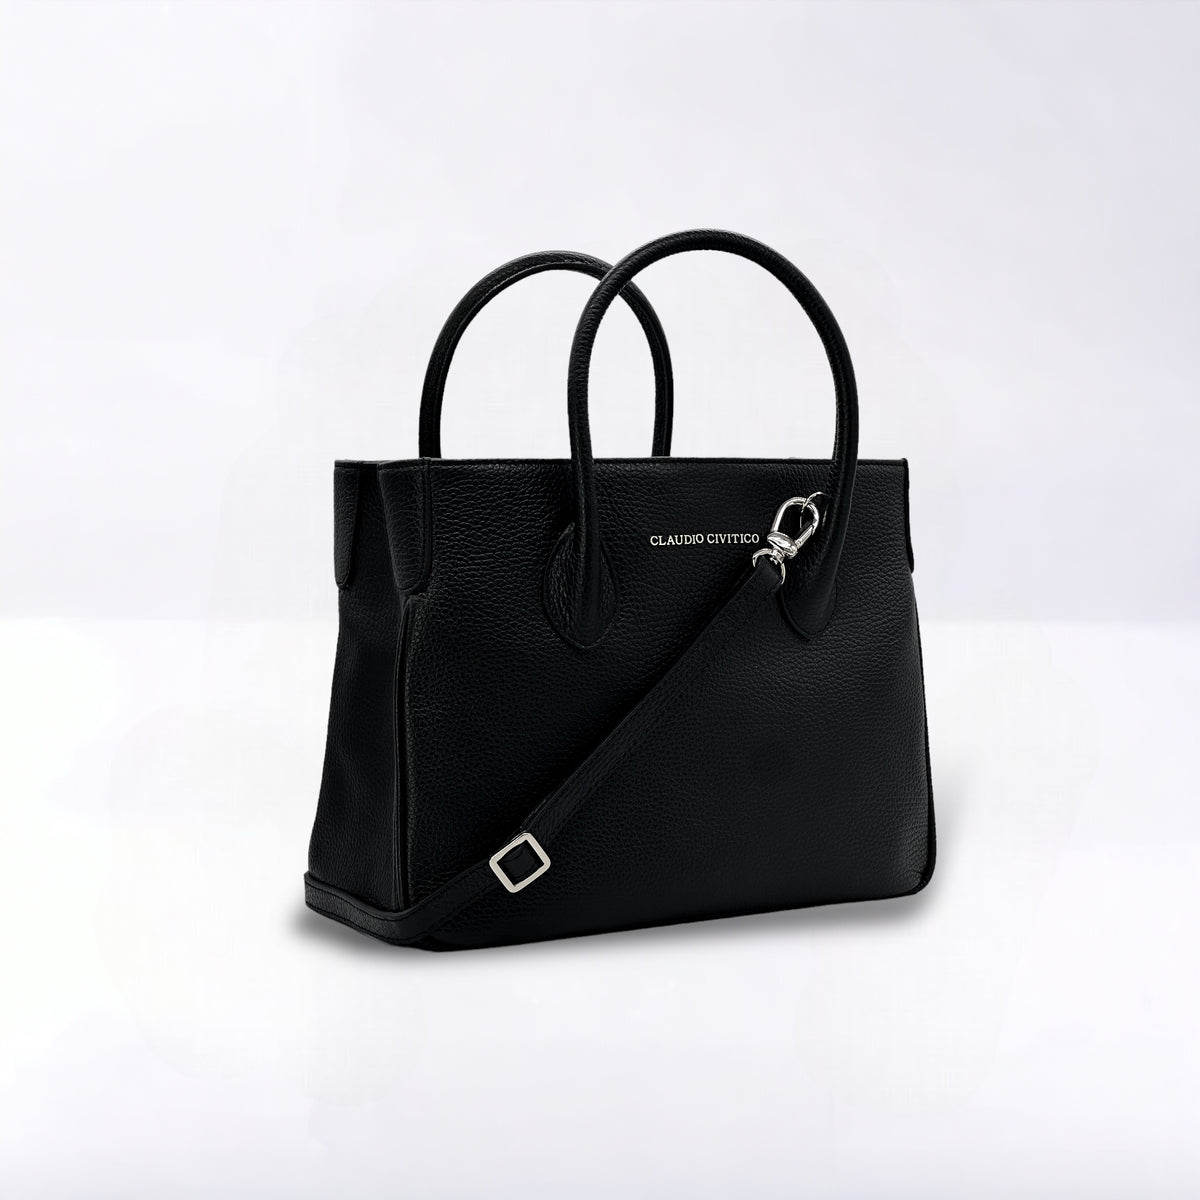 Black Satchel purse with silver hardware